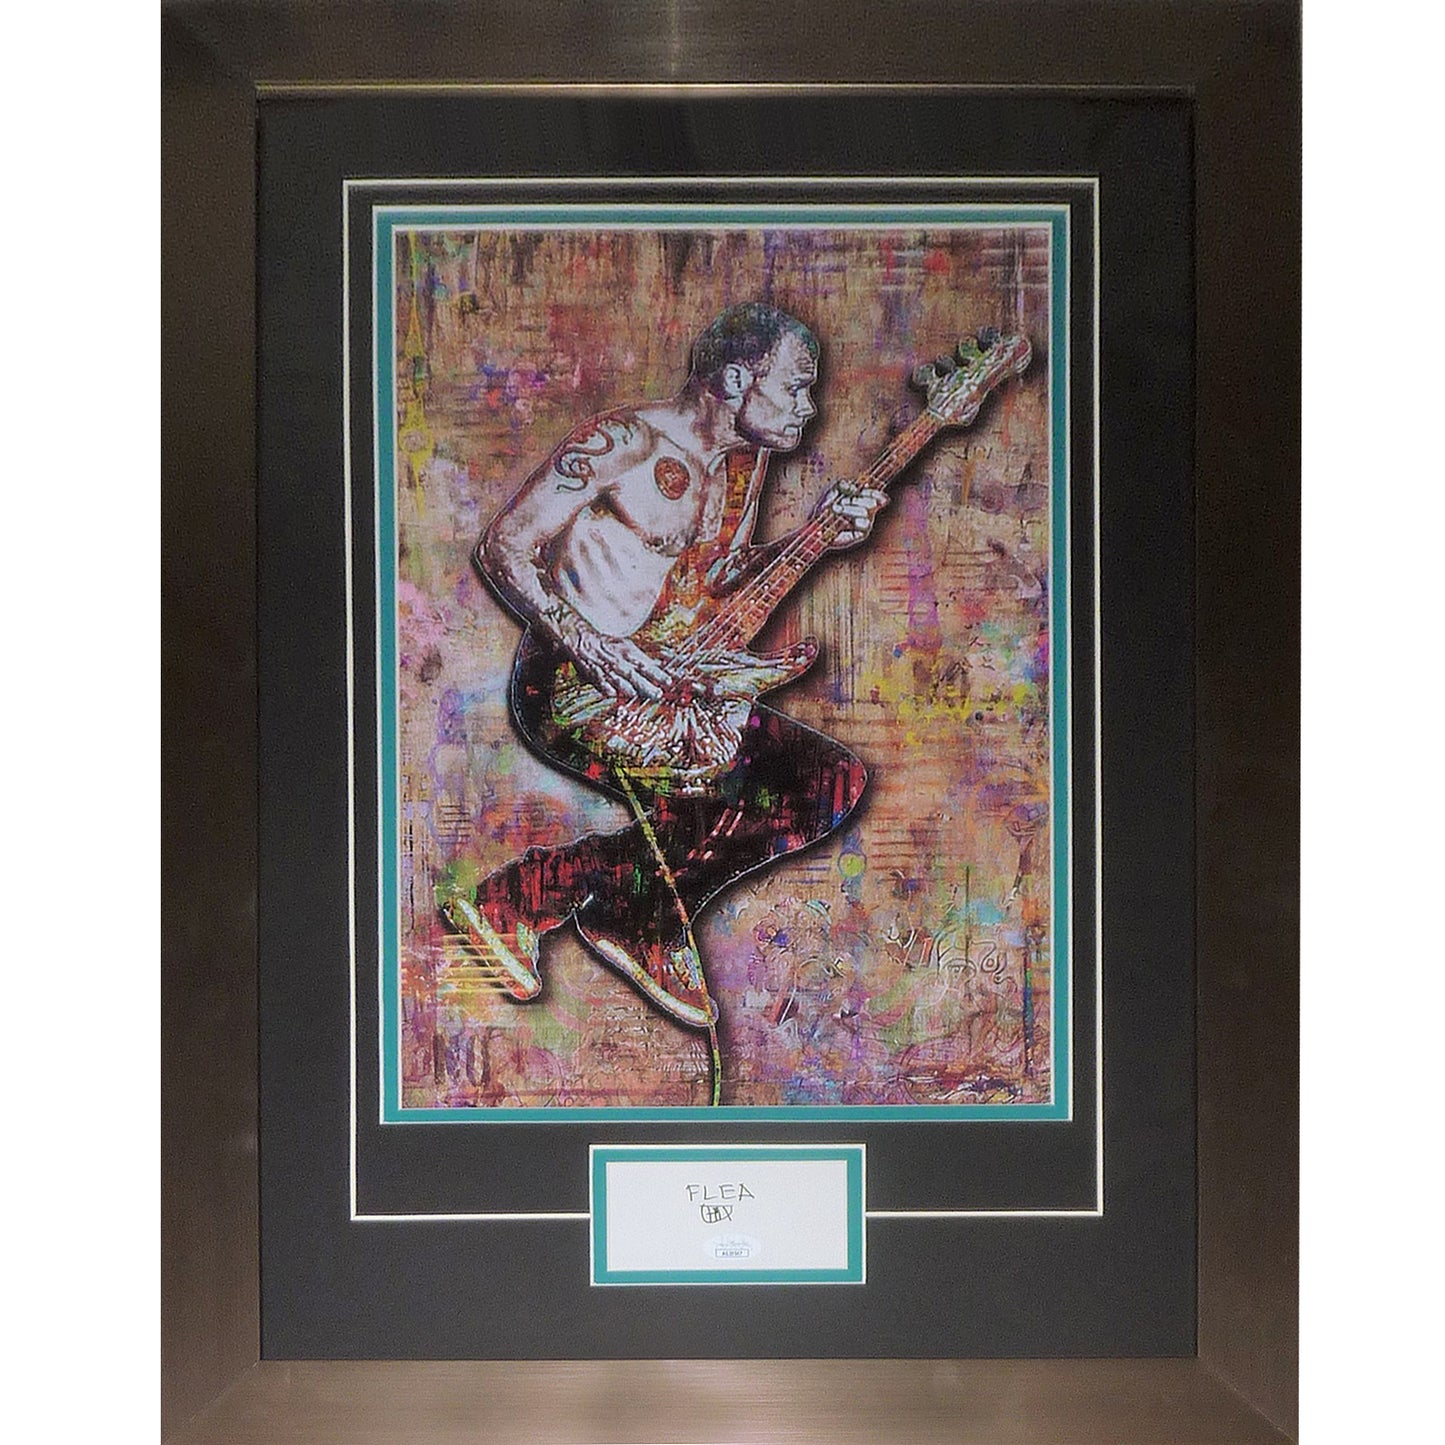 Flea Red Hot Chili Peppers 12x18 Splash Artwork Deluxe Framed with Autograph - JSA